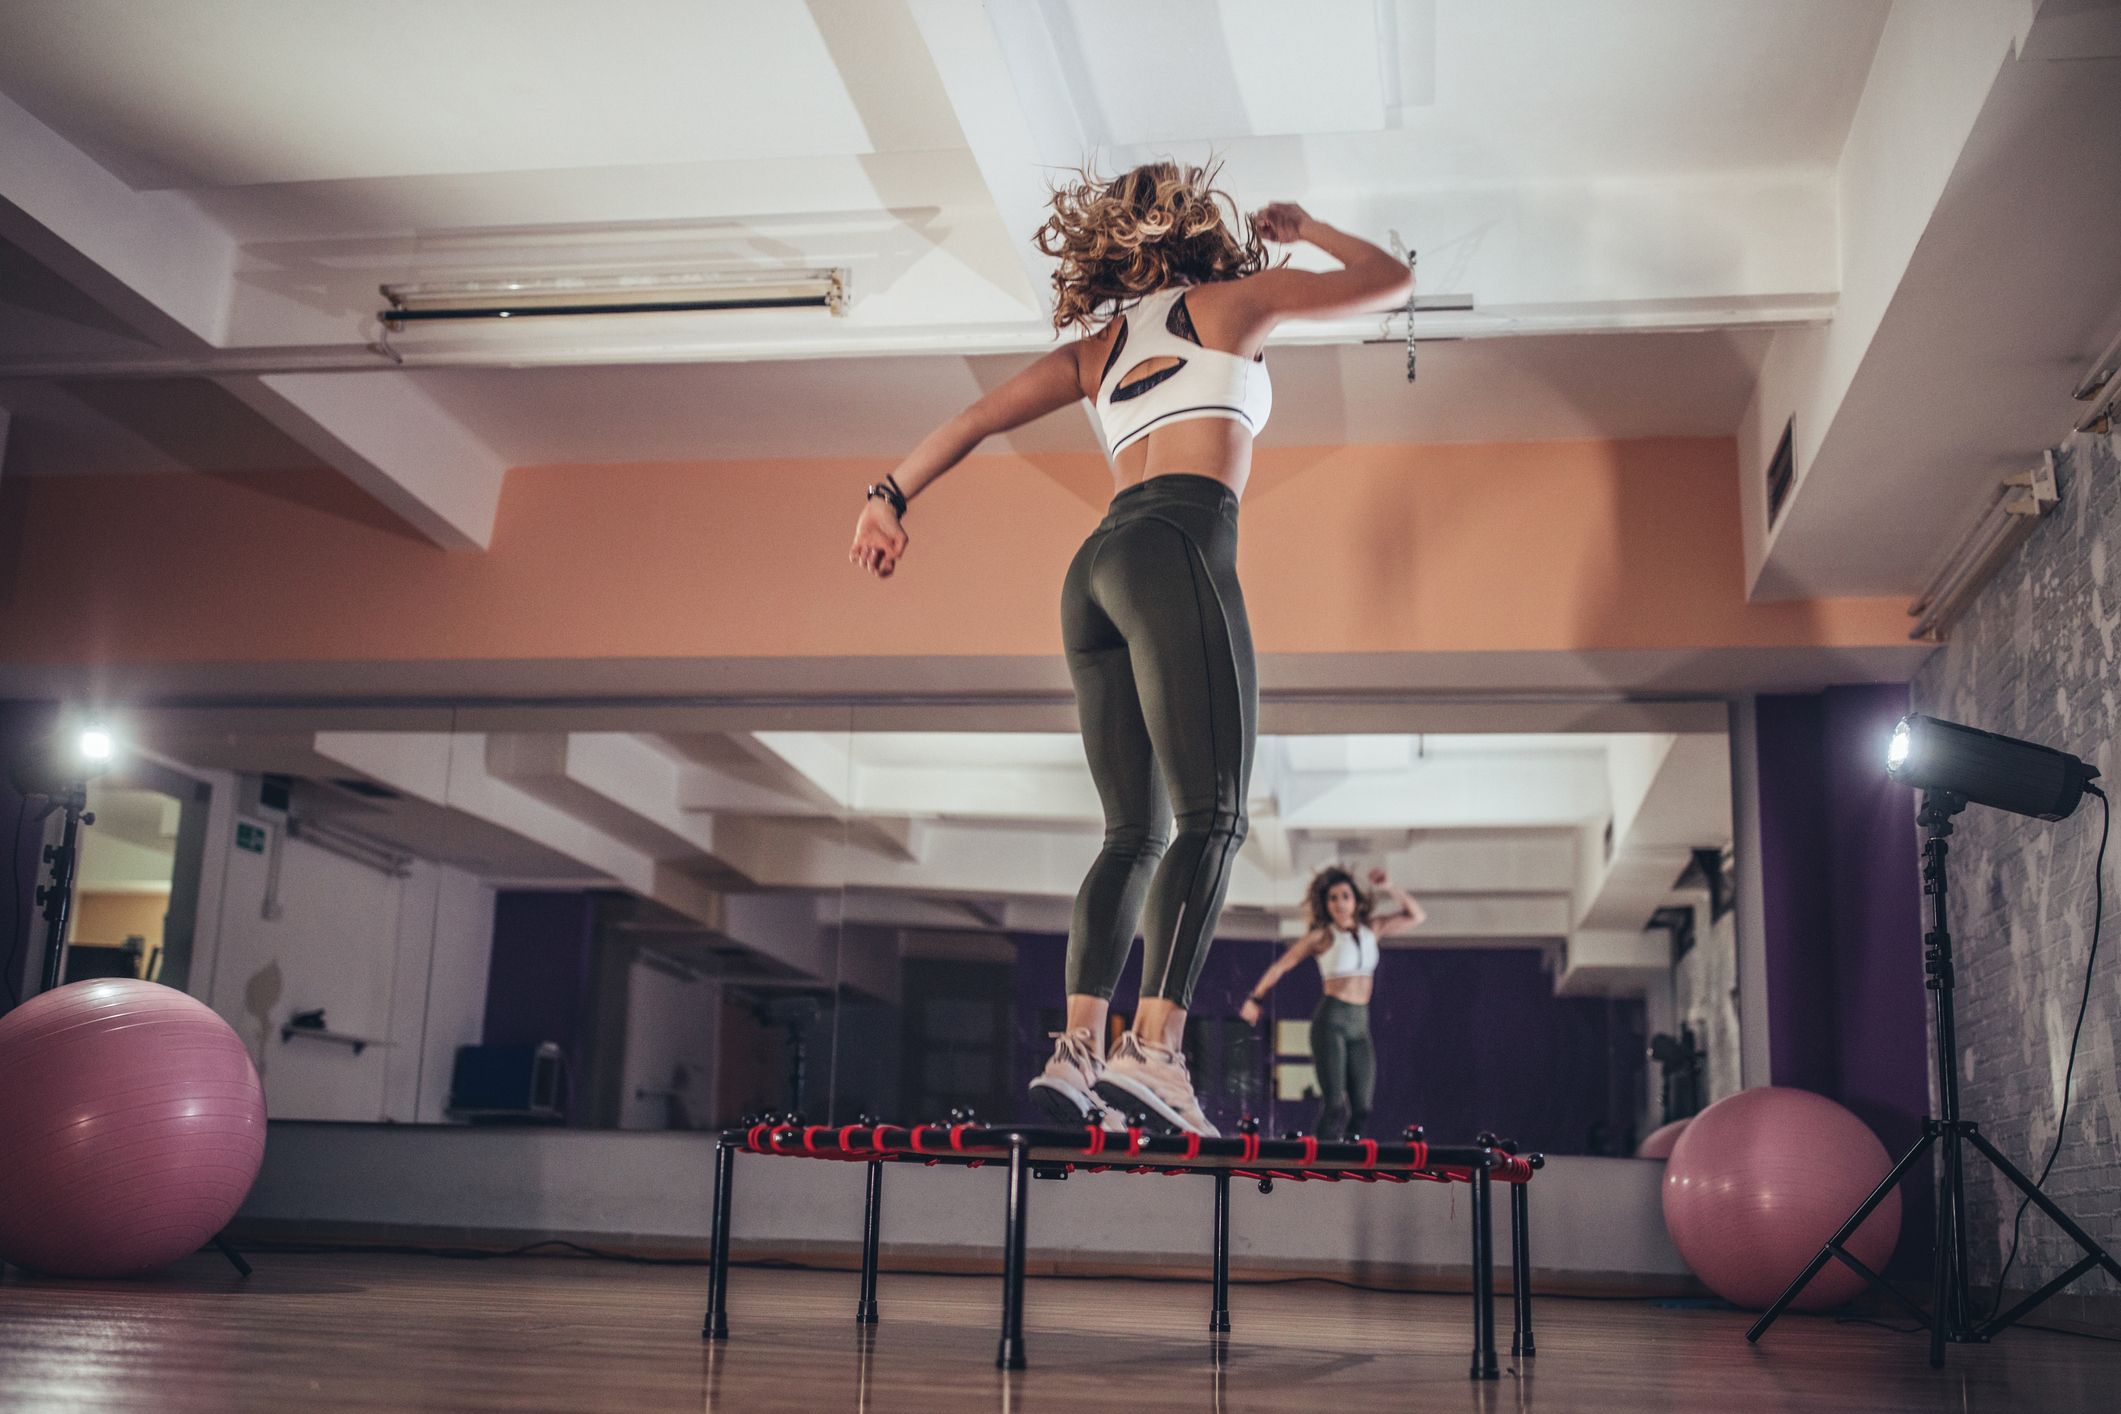 11 Best Exercise Trampolines to Level Up Your Workouts in 2022